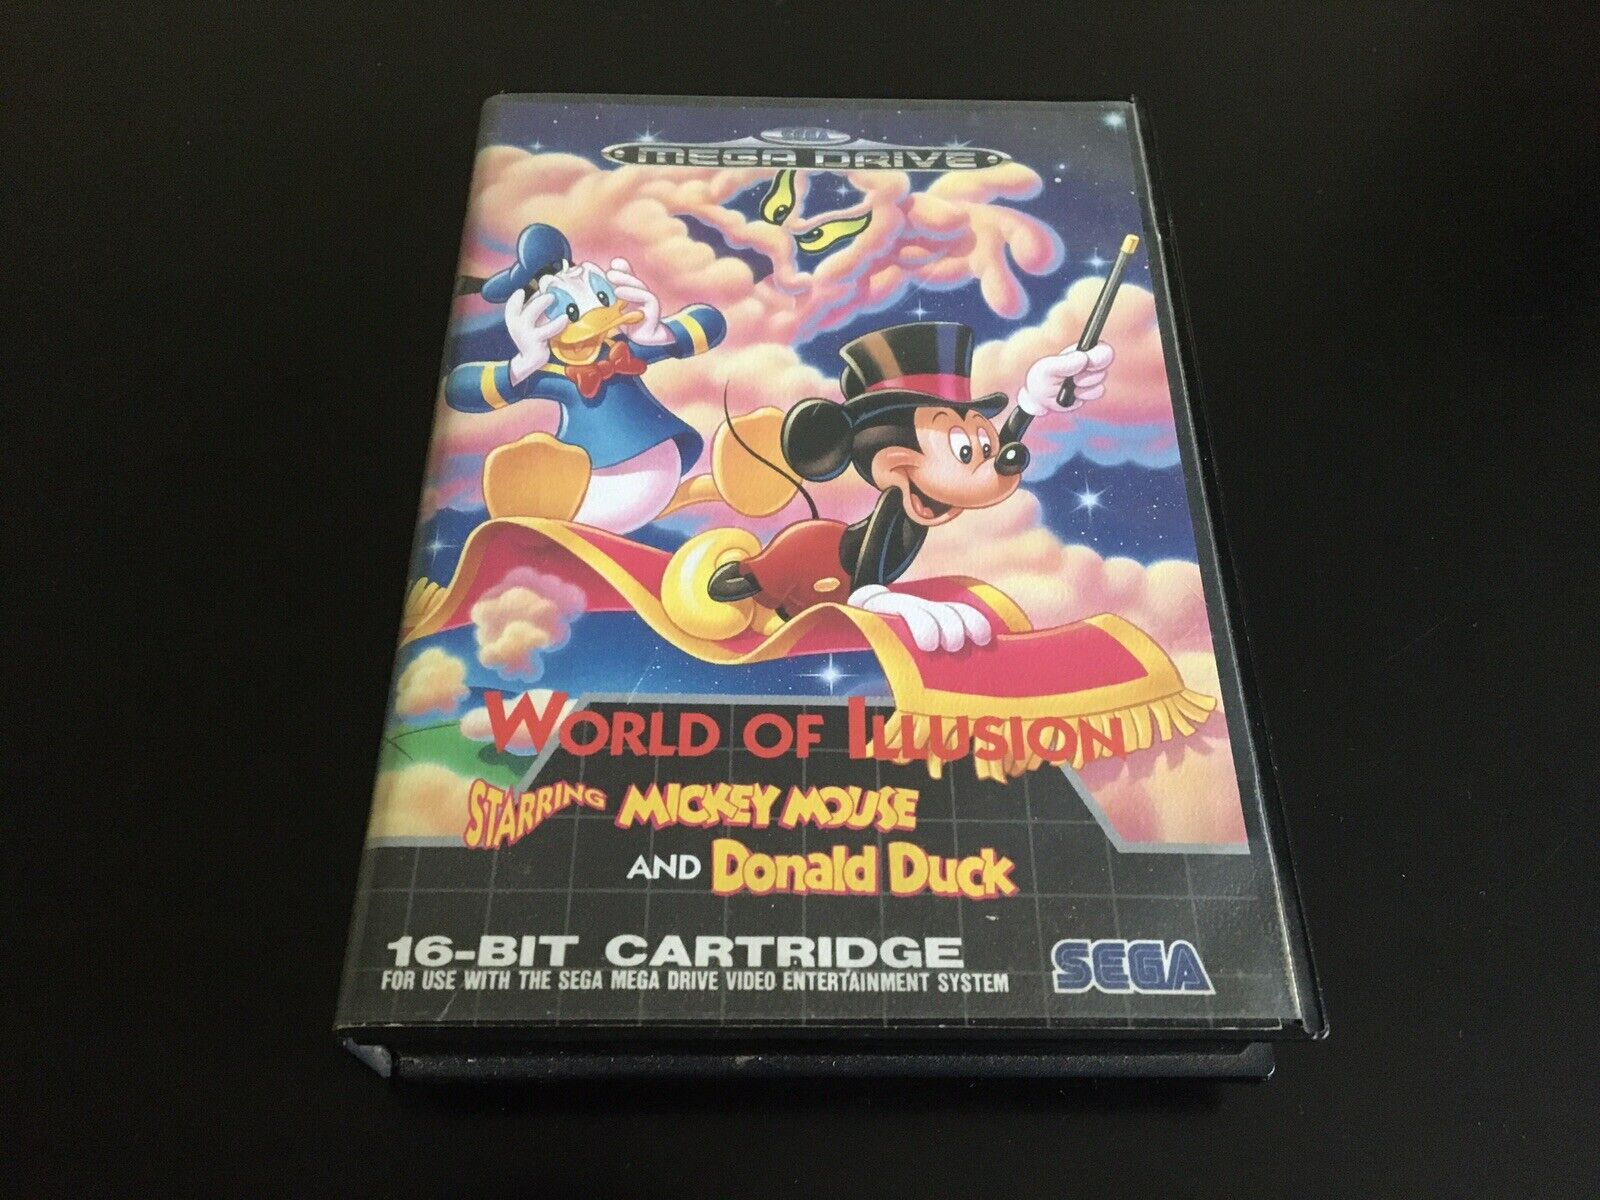 WORLD OF ILLUSION STARRING MICKEY MOUSE DONALD DUCK SEGA MEGADRIVE COMPLET CIB